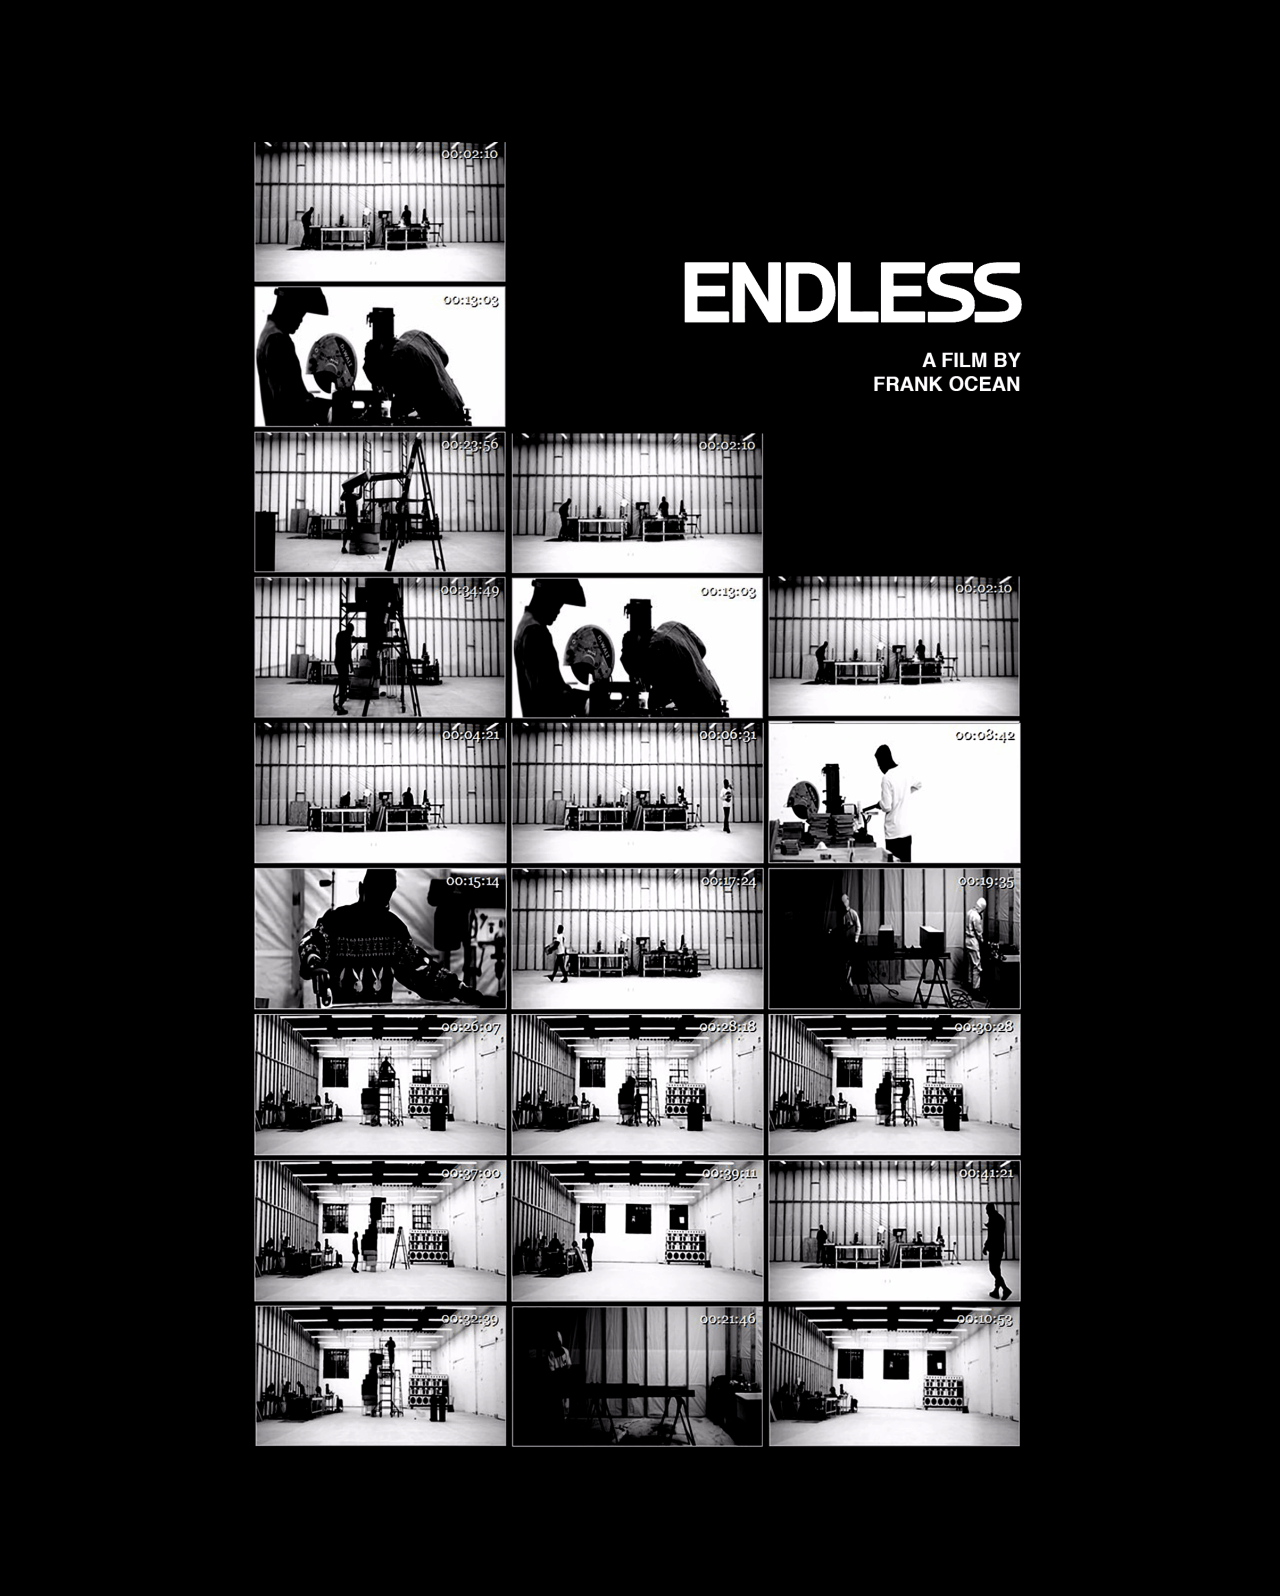 Anyone have a HQ version of this amazing endless poster